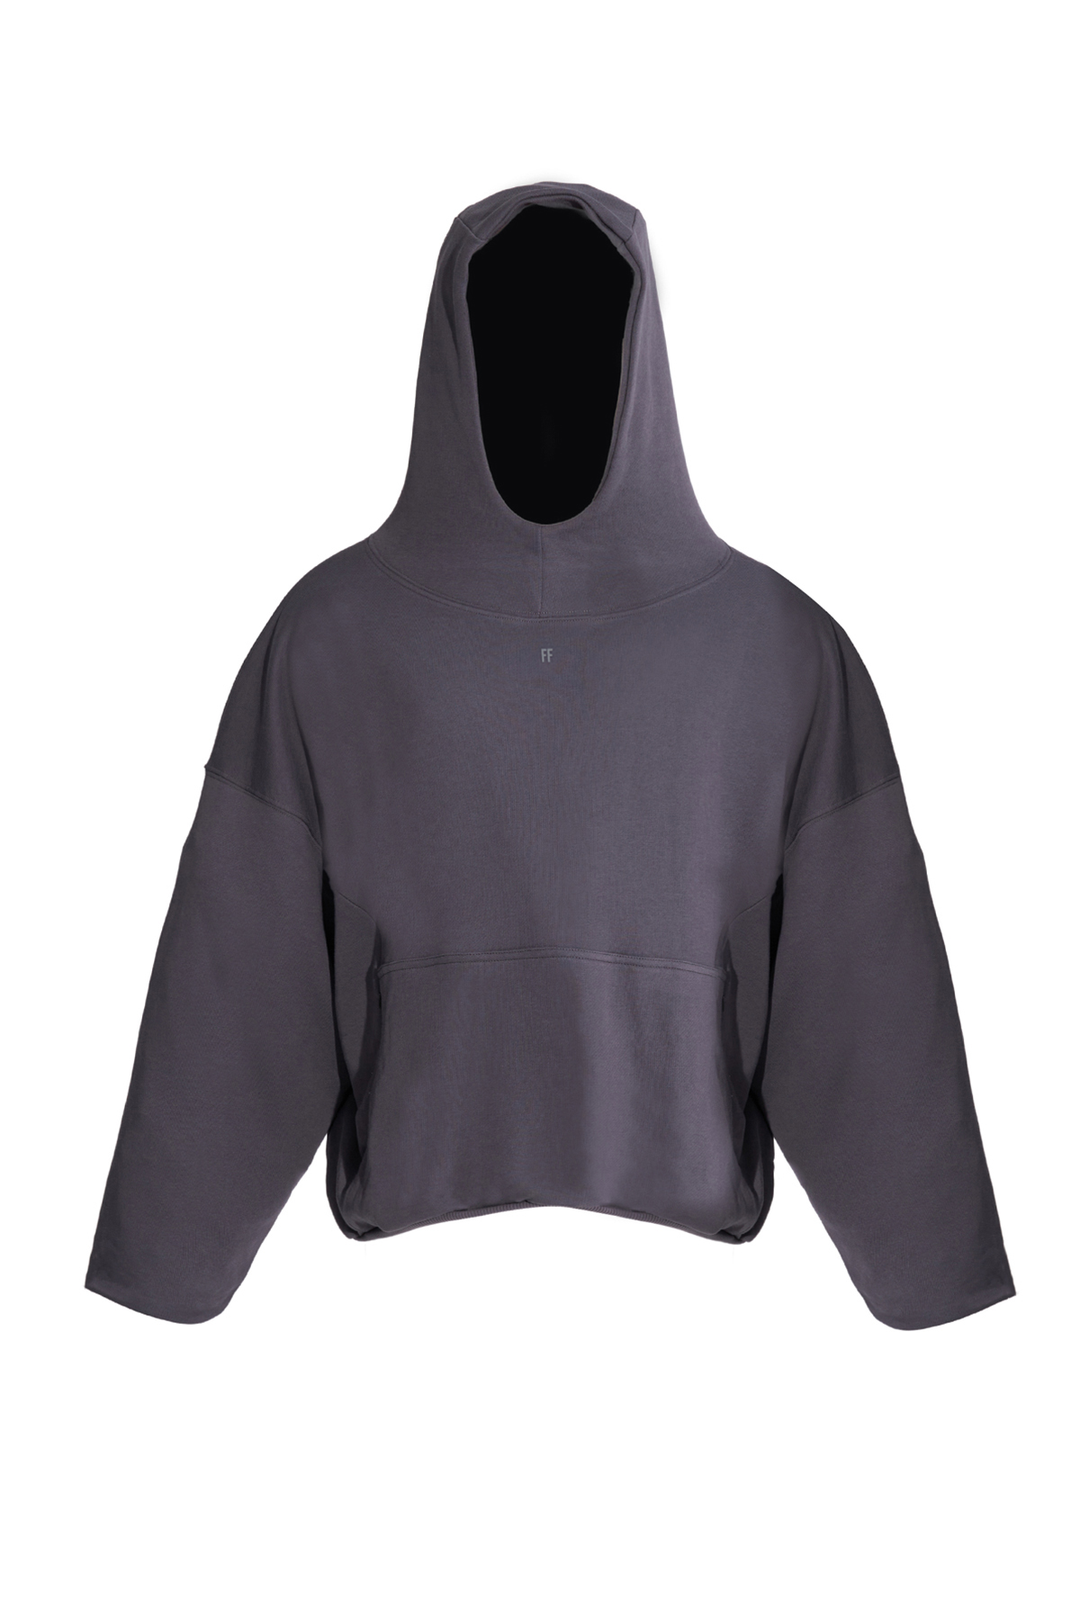 FF / Oversized Double Layer Pullover Hoodie